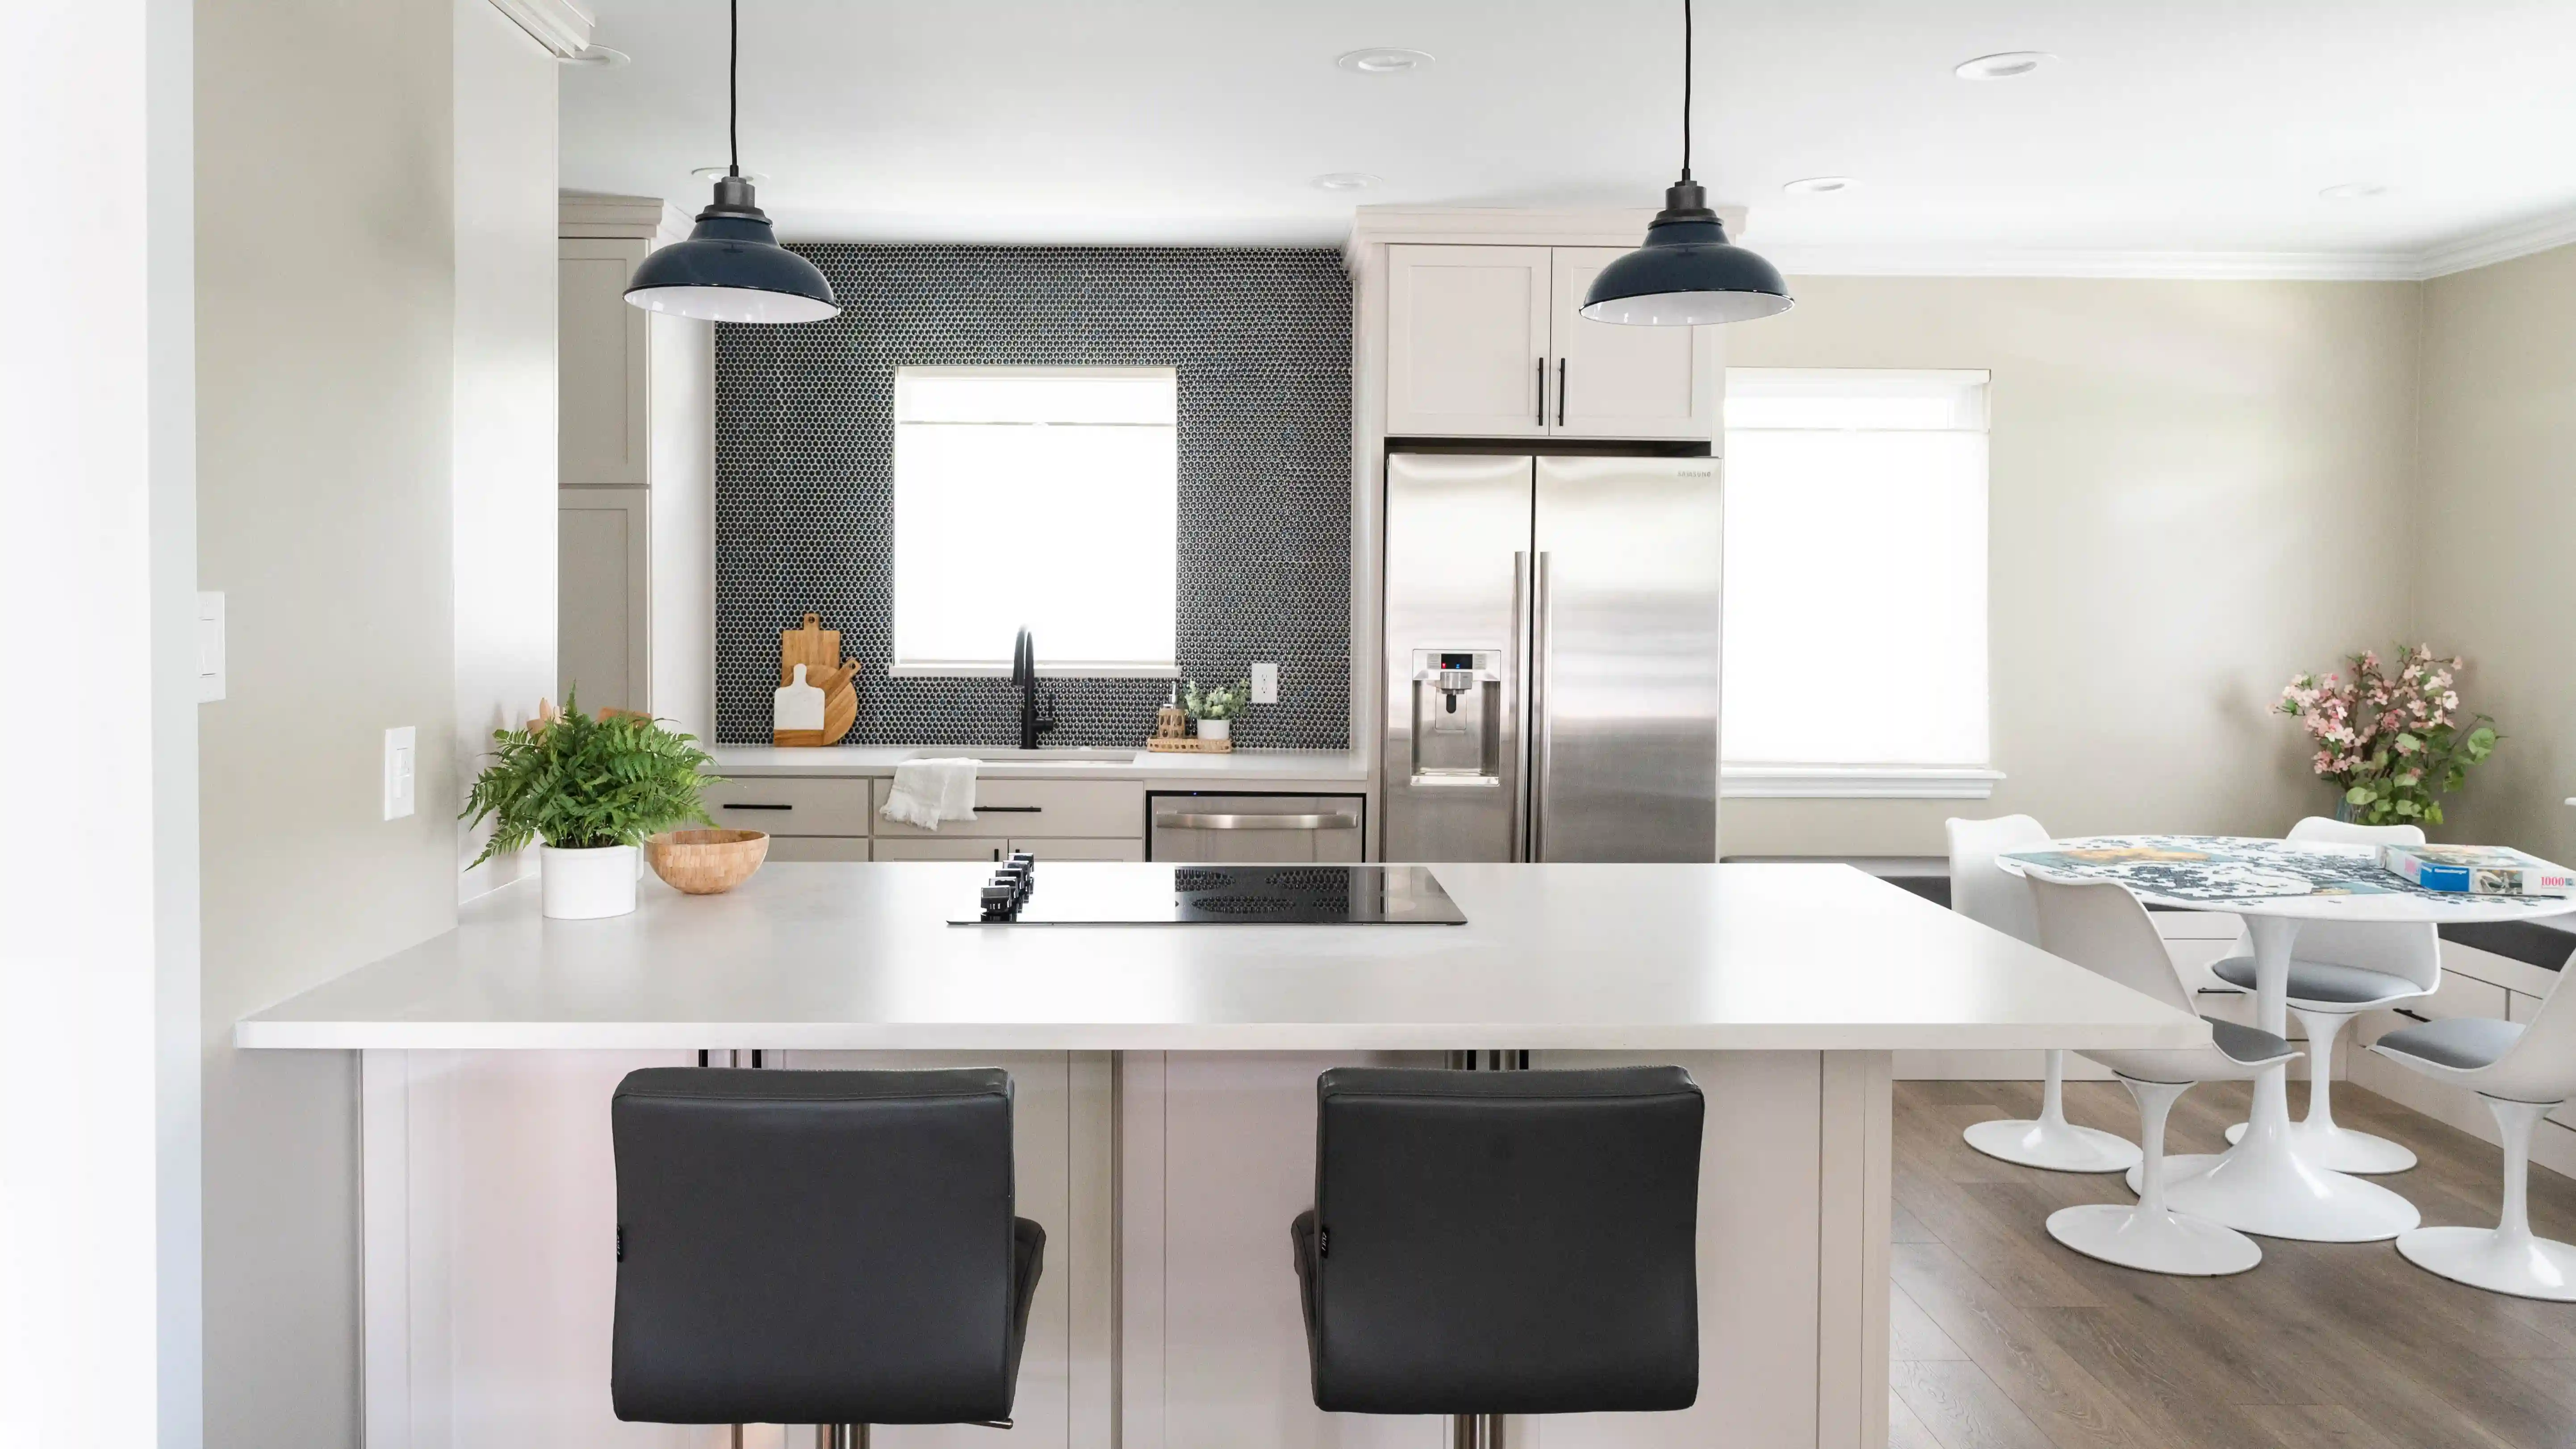 Two black leather barstools sit up against a white kitchen island with white countertops. A white table and chairs sits in the right side corner of the kitchen. All the appliances within the kitchen are stainless steel. A black penny tile backsplash contrasts the white of the kitchen on the back wall over the sink. 